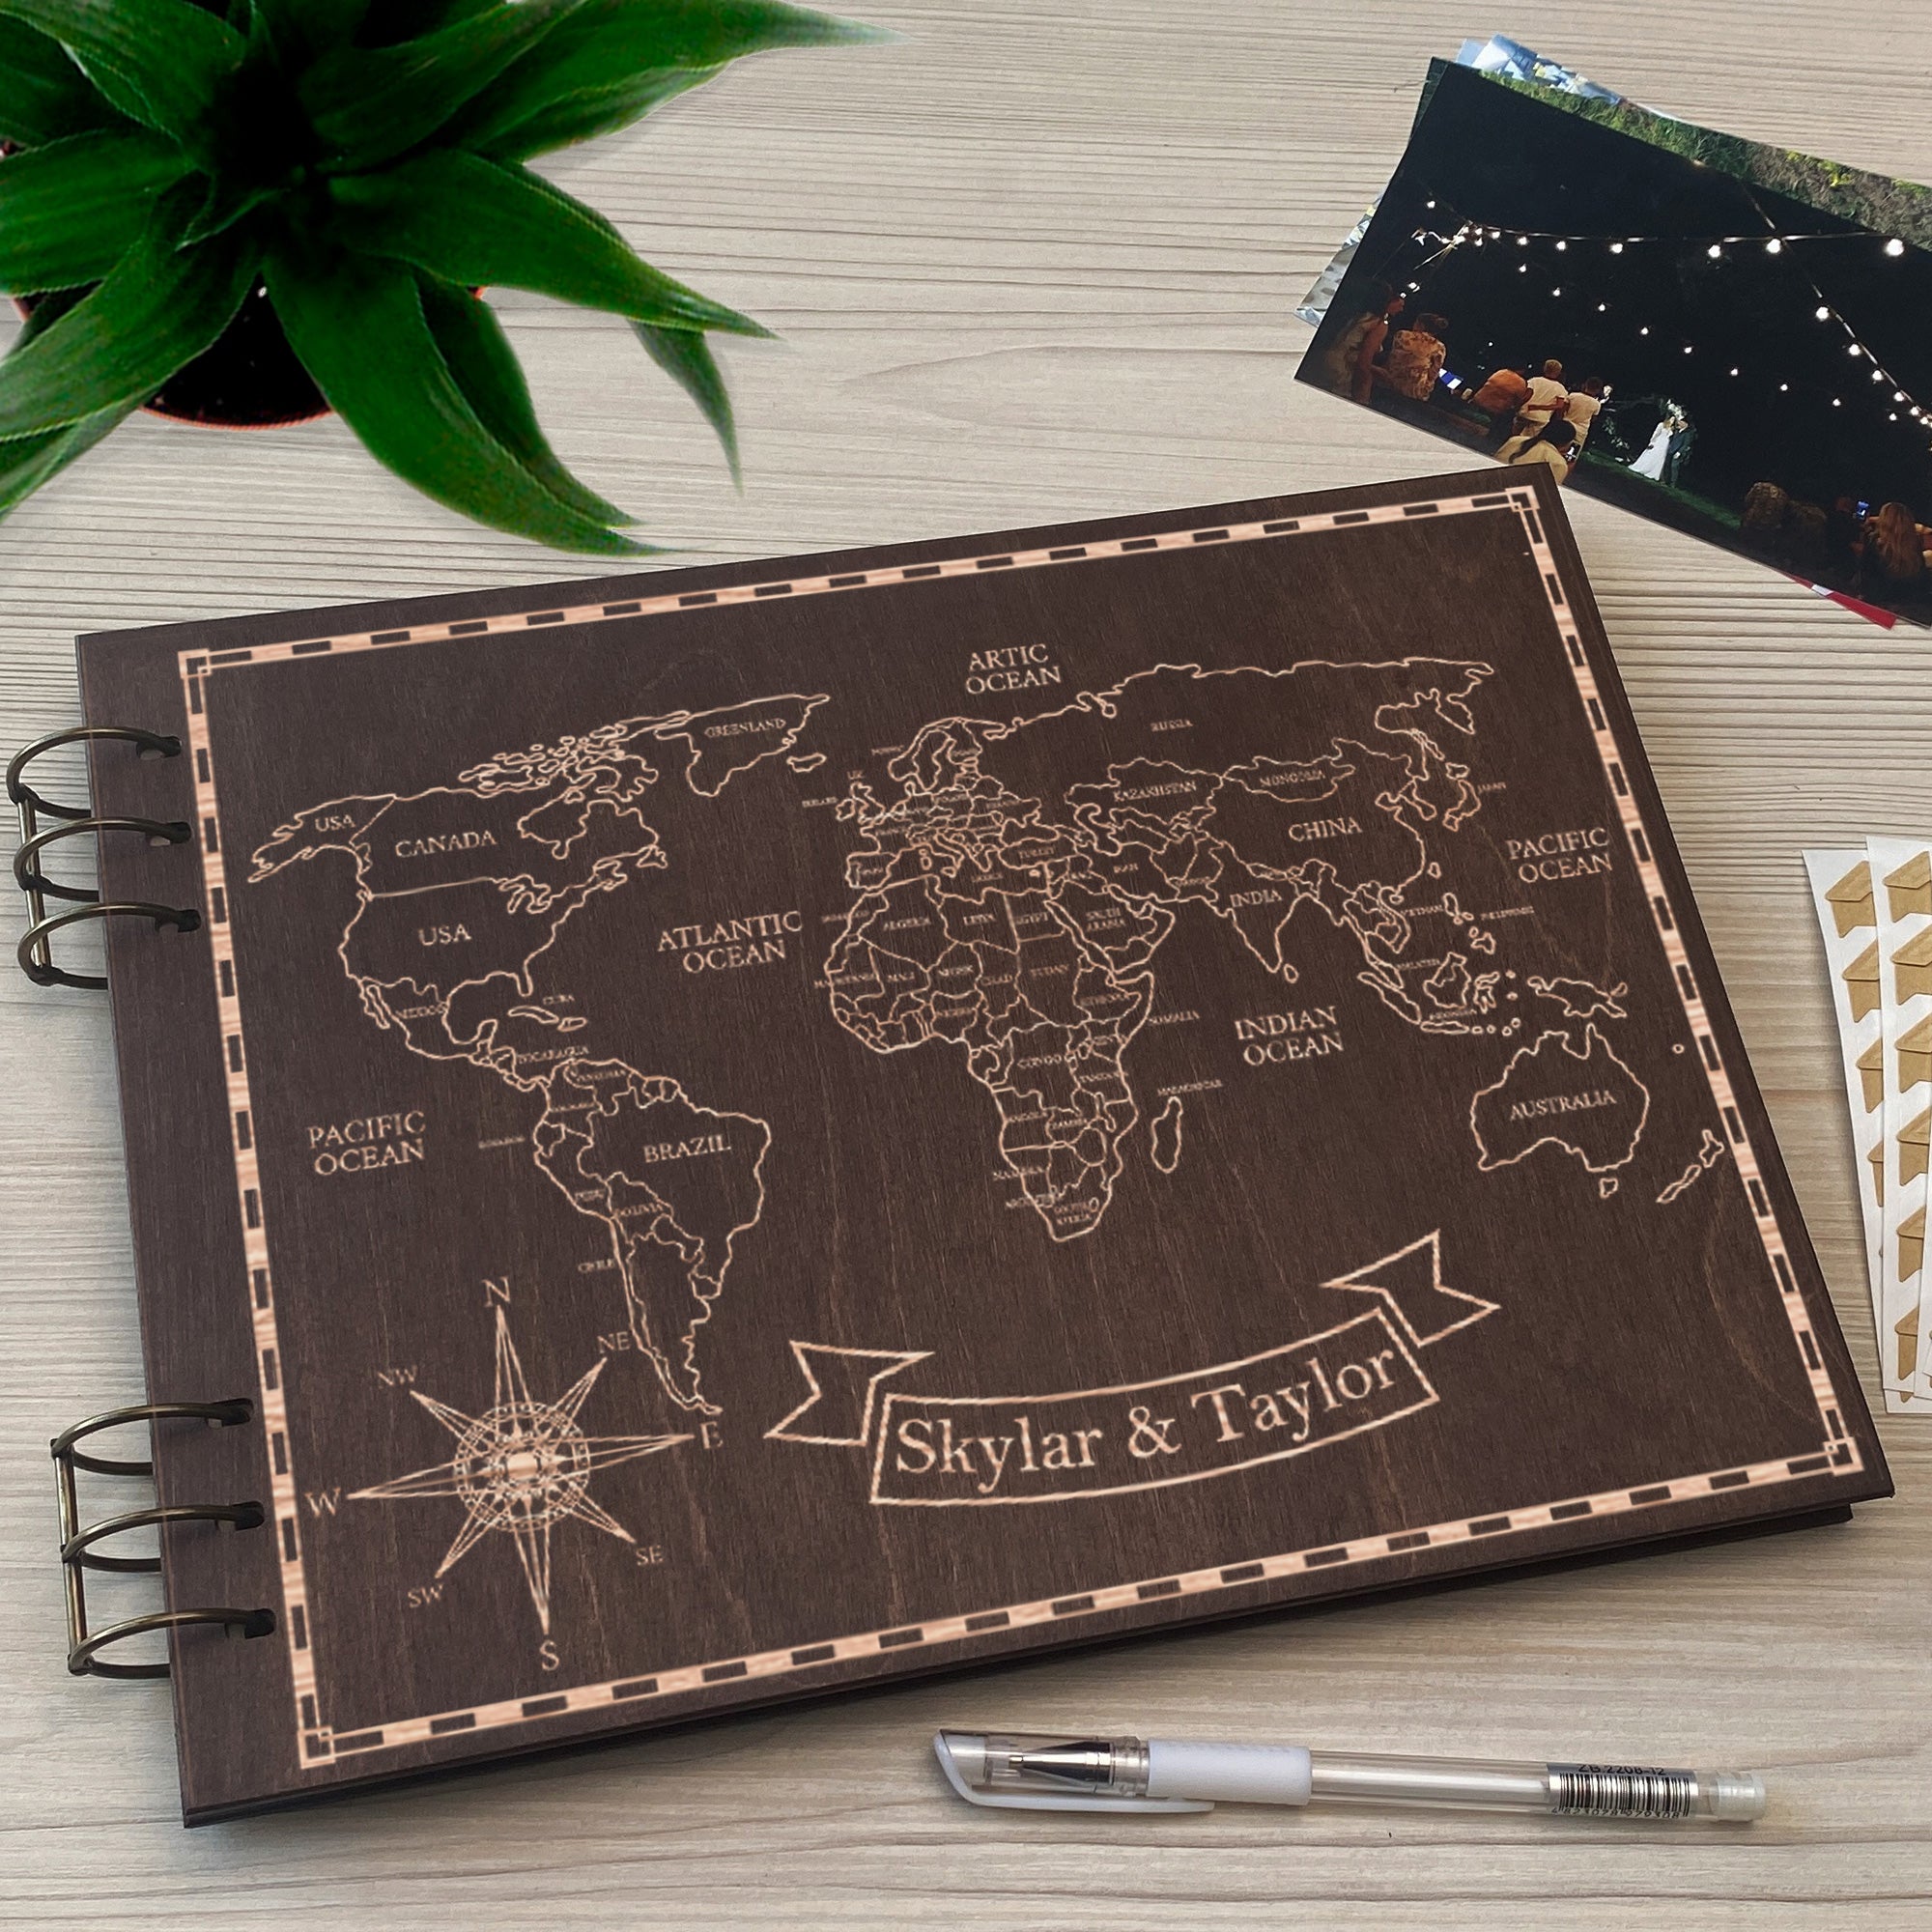 Personalized photo album cover and Zero meridian map engraving